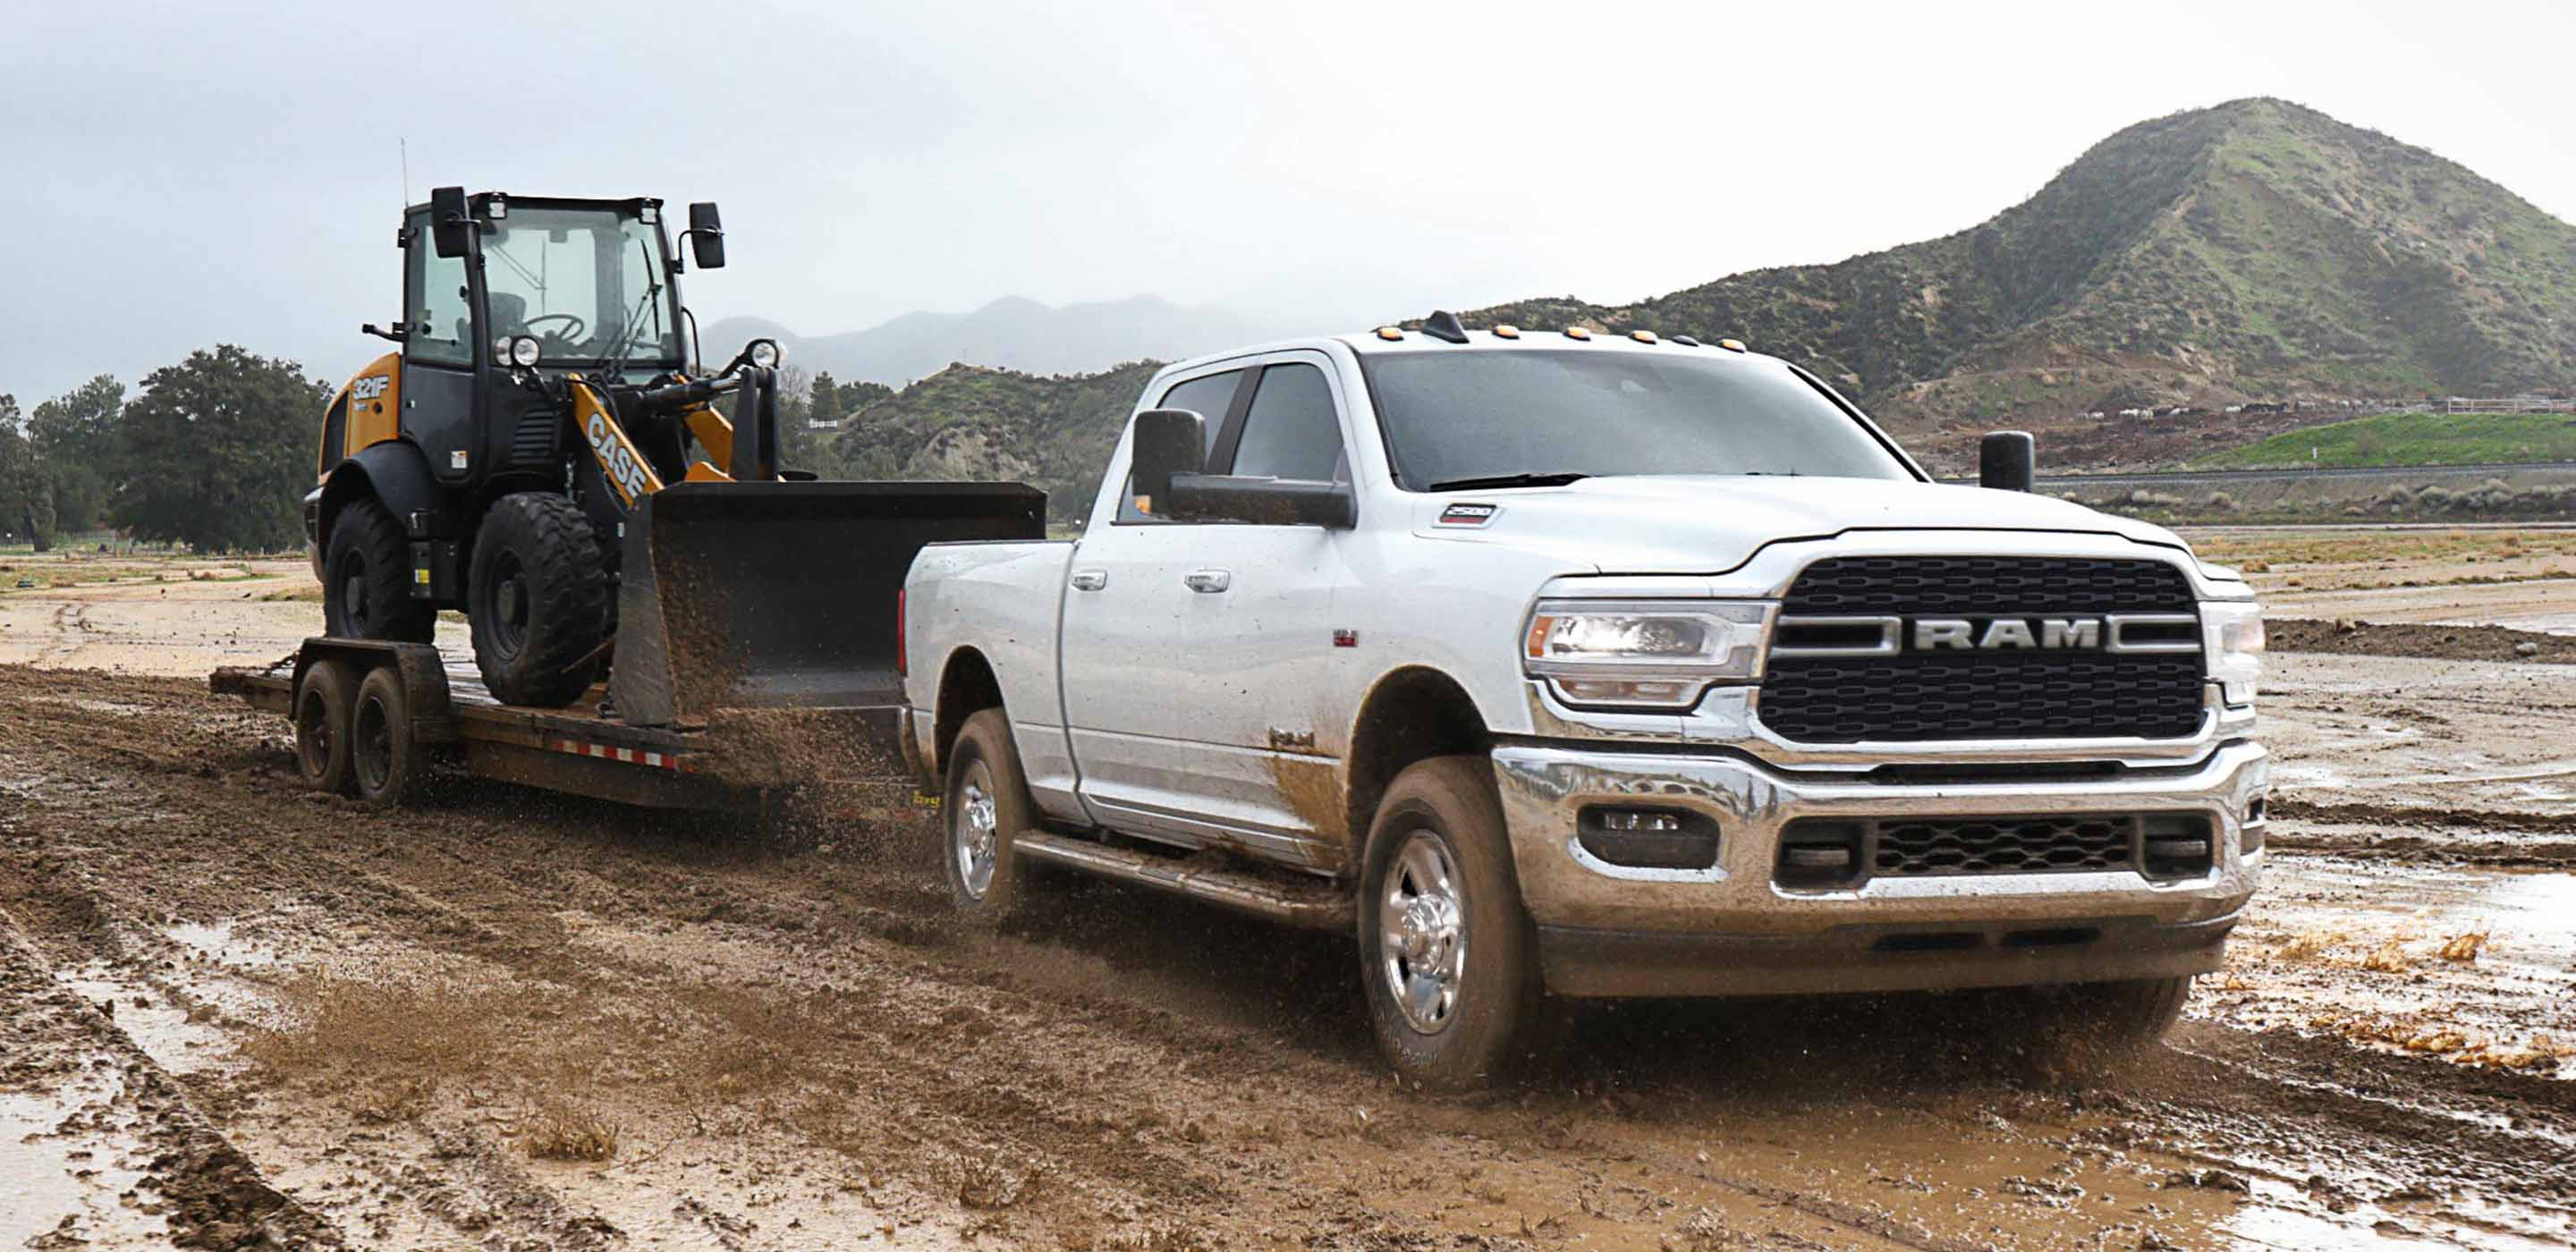 The 2022 Ram 2500 towing a flatbed trailer with an excavator on it through a muddy field.